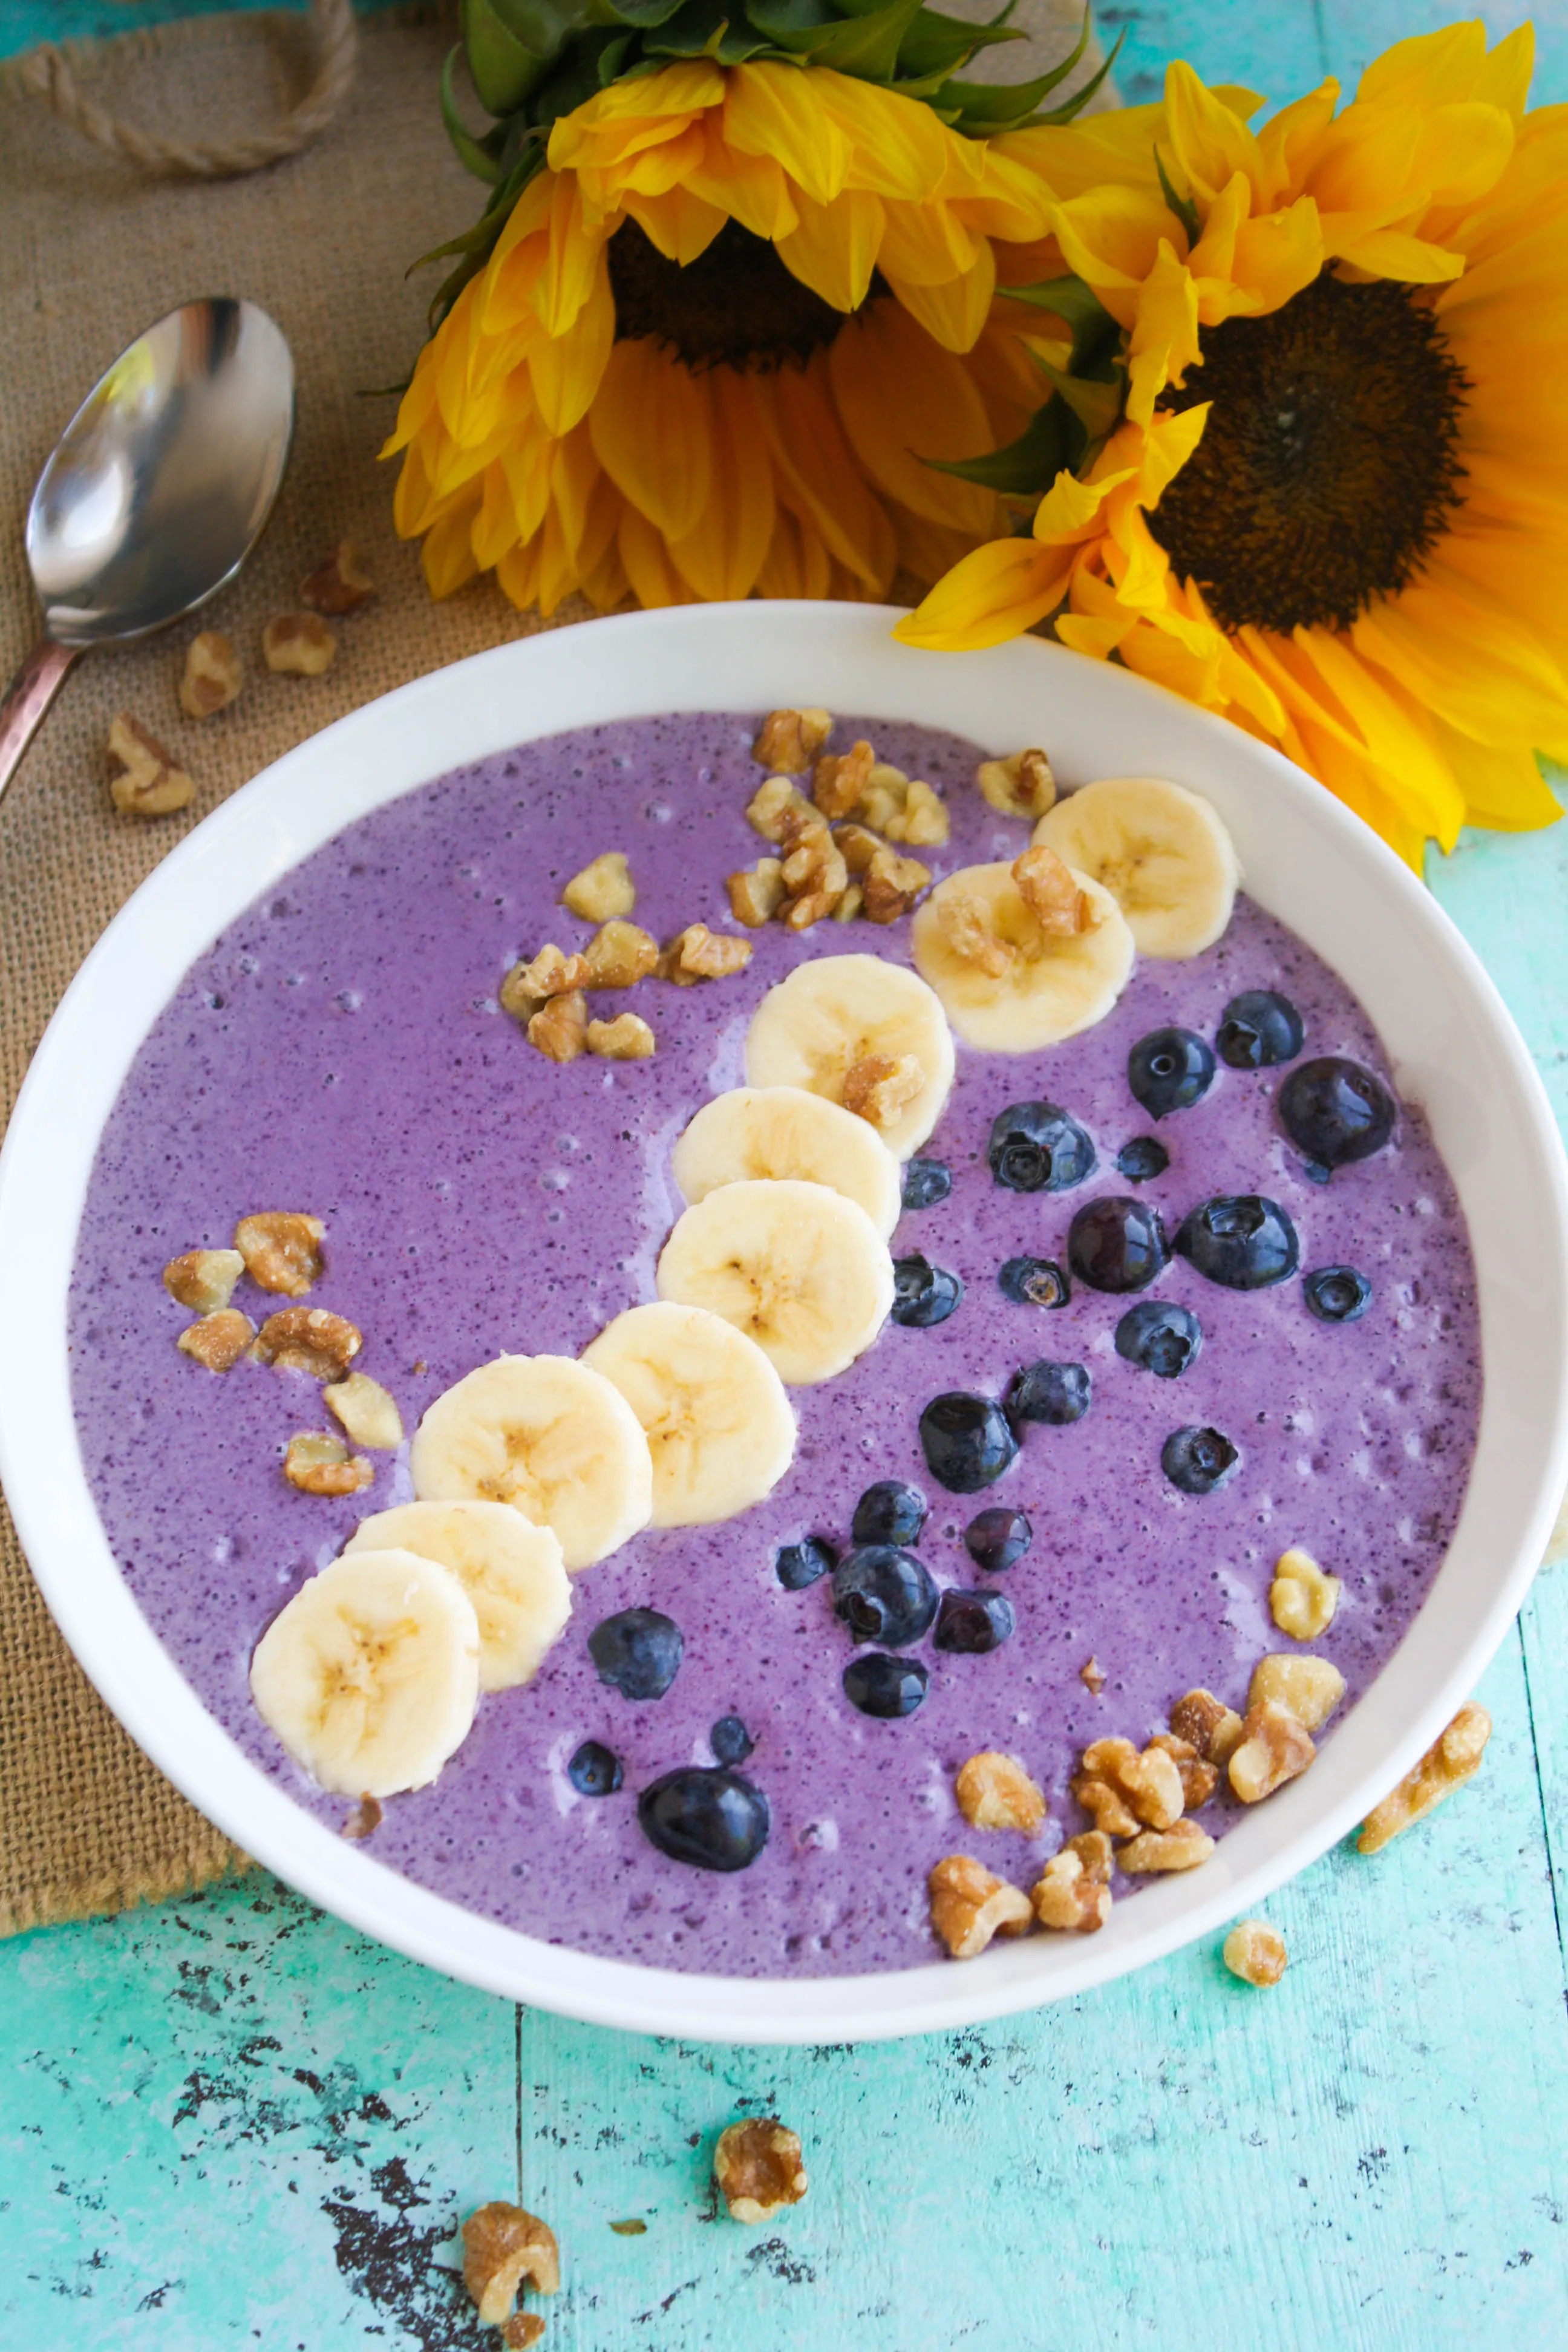 Blueberry Banana Walnut Smoothie Bowls are a great way to start your day. These Blueberry Banana Walnut Smoothie Bowls are a delight first thing in the a.m.!